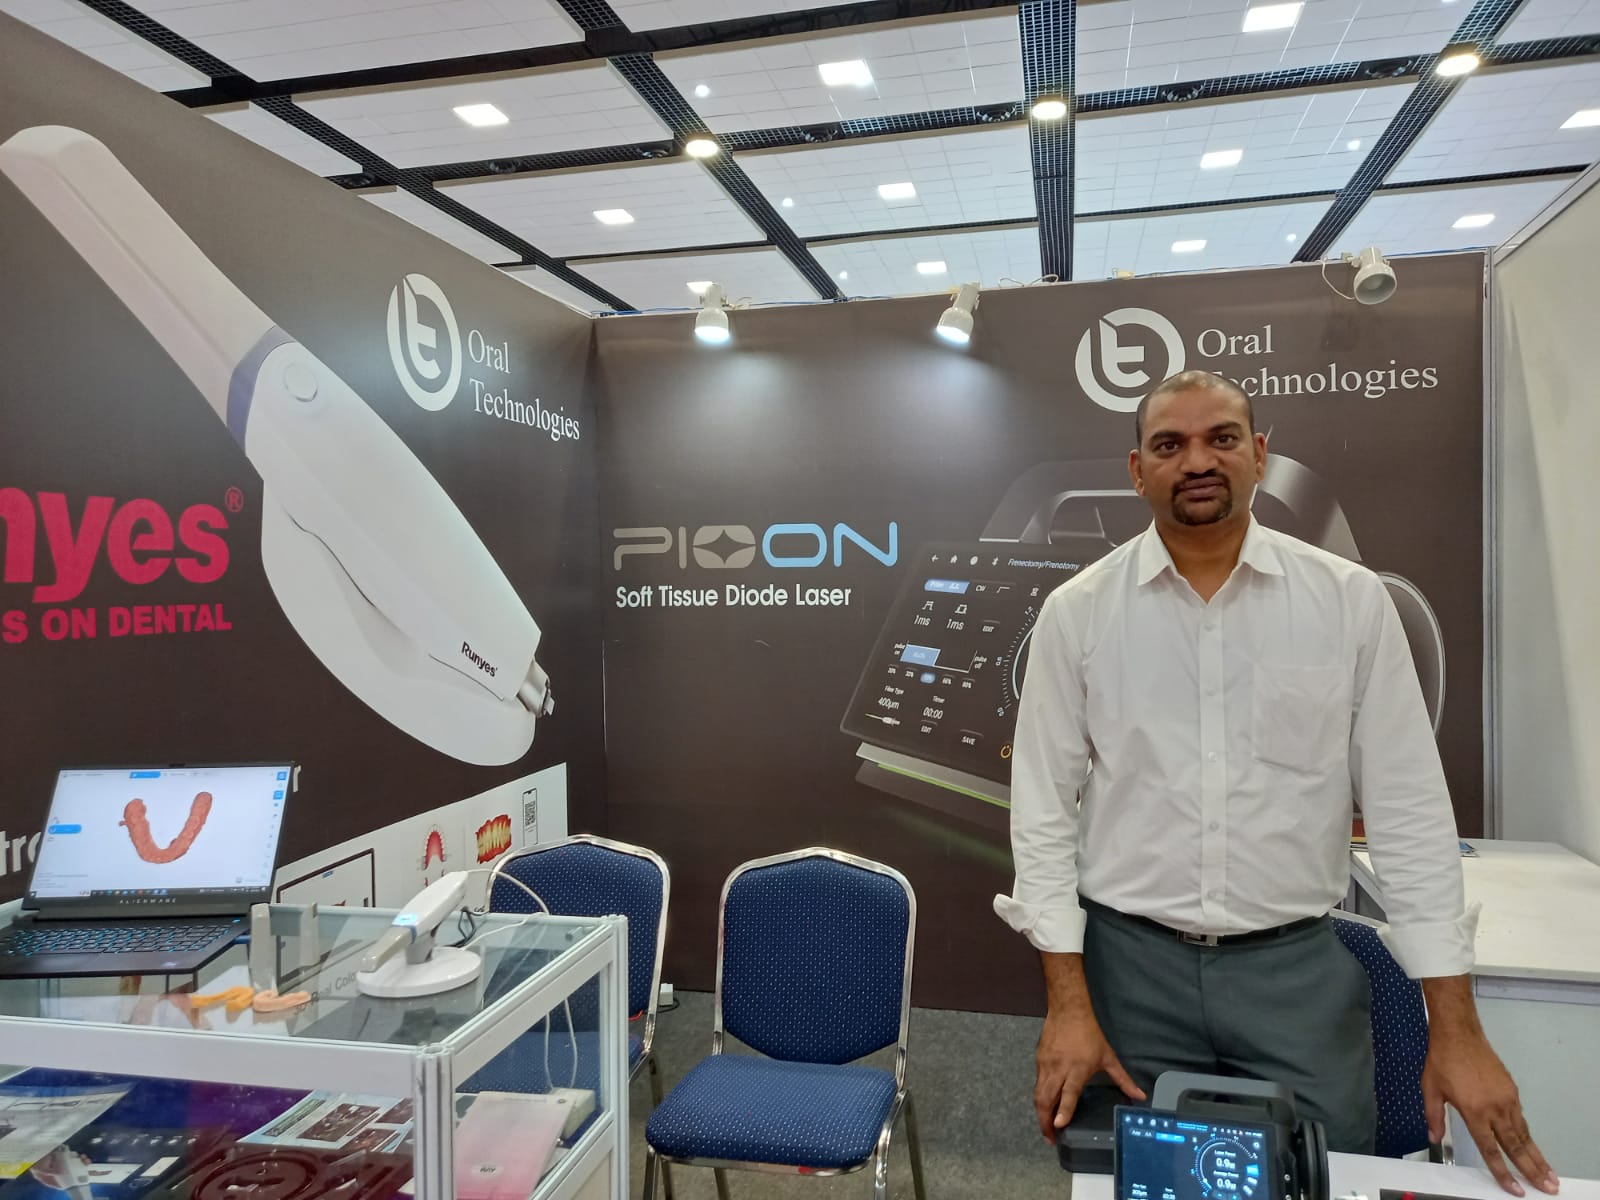 Indian Dental Technology Exhibition